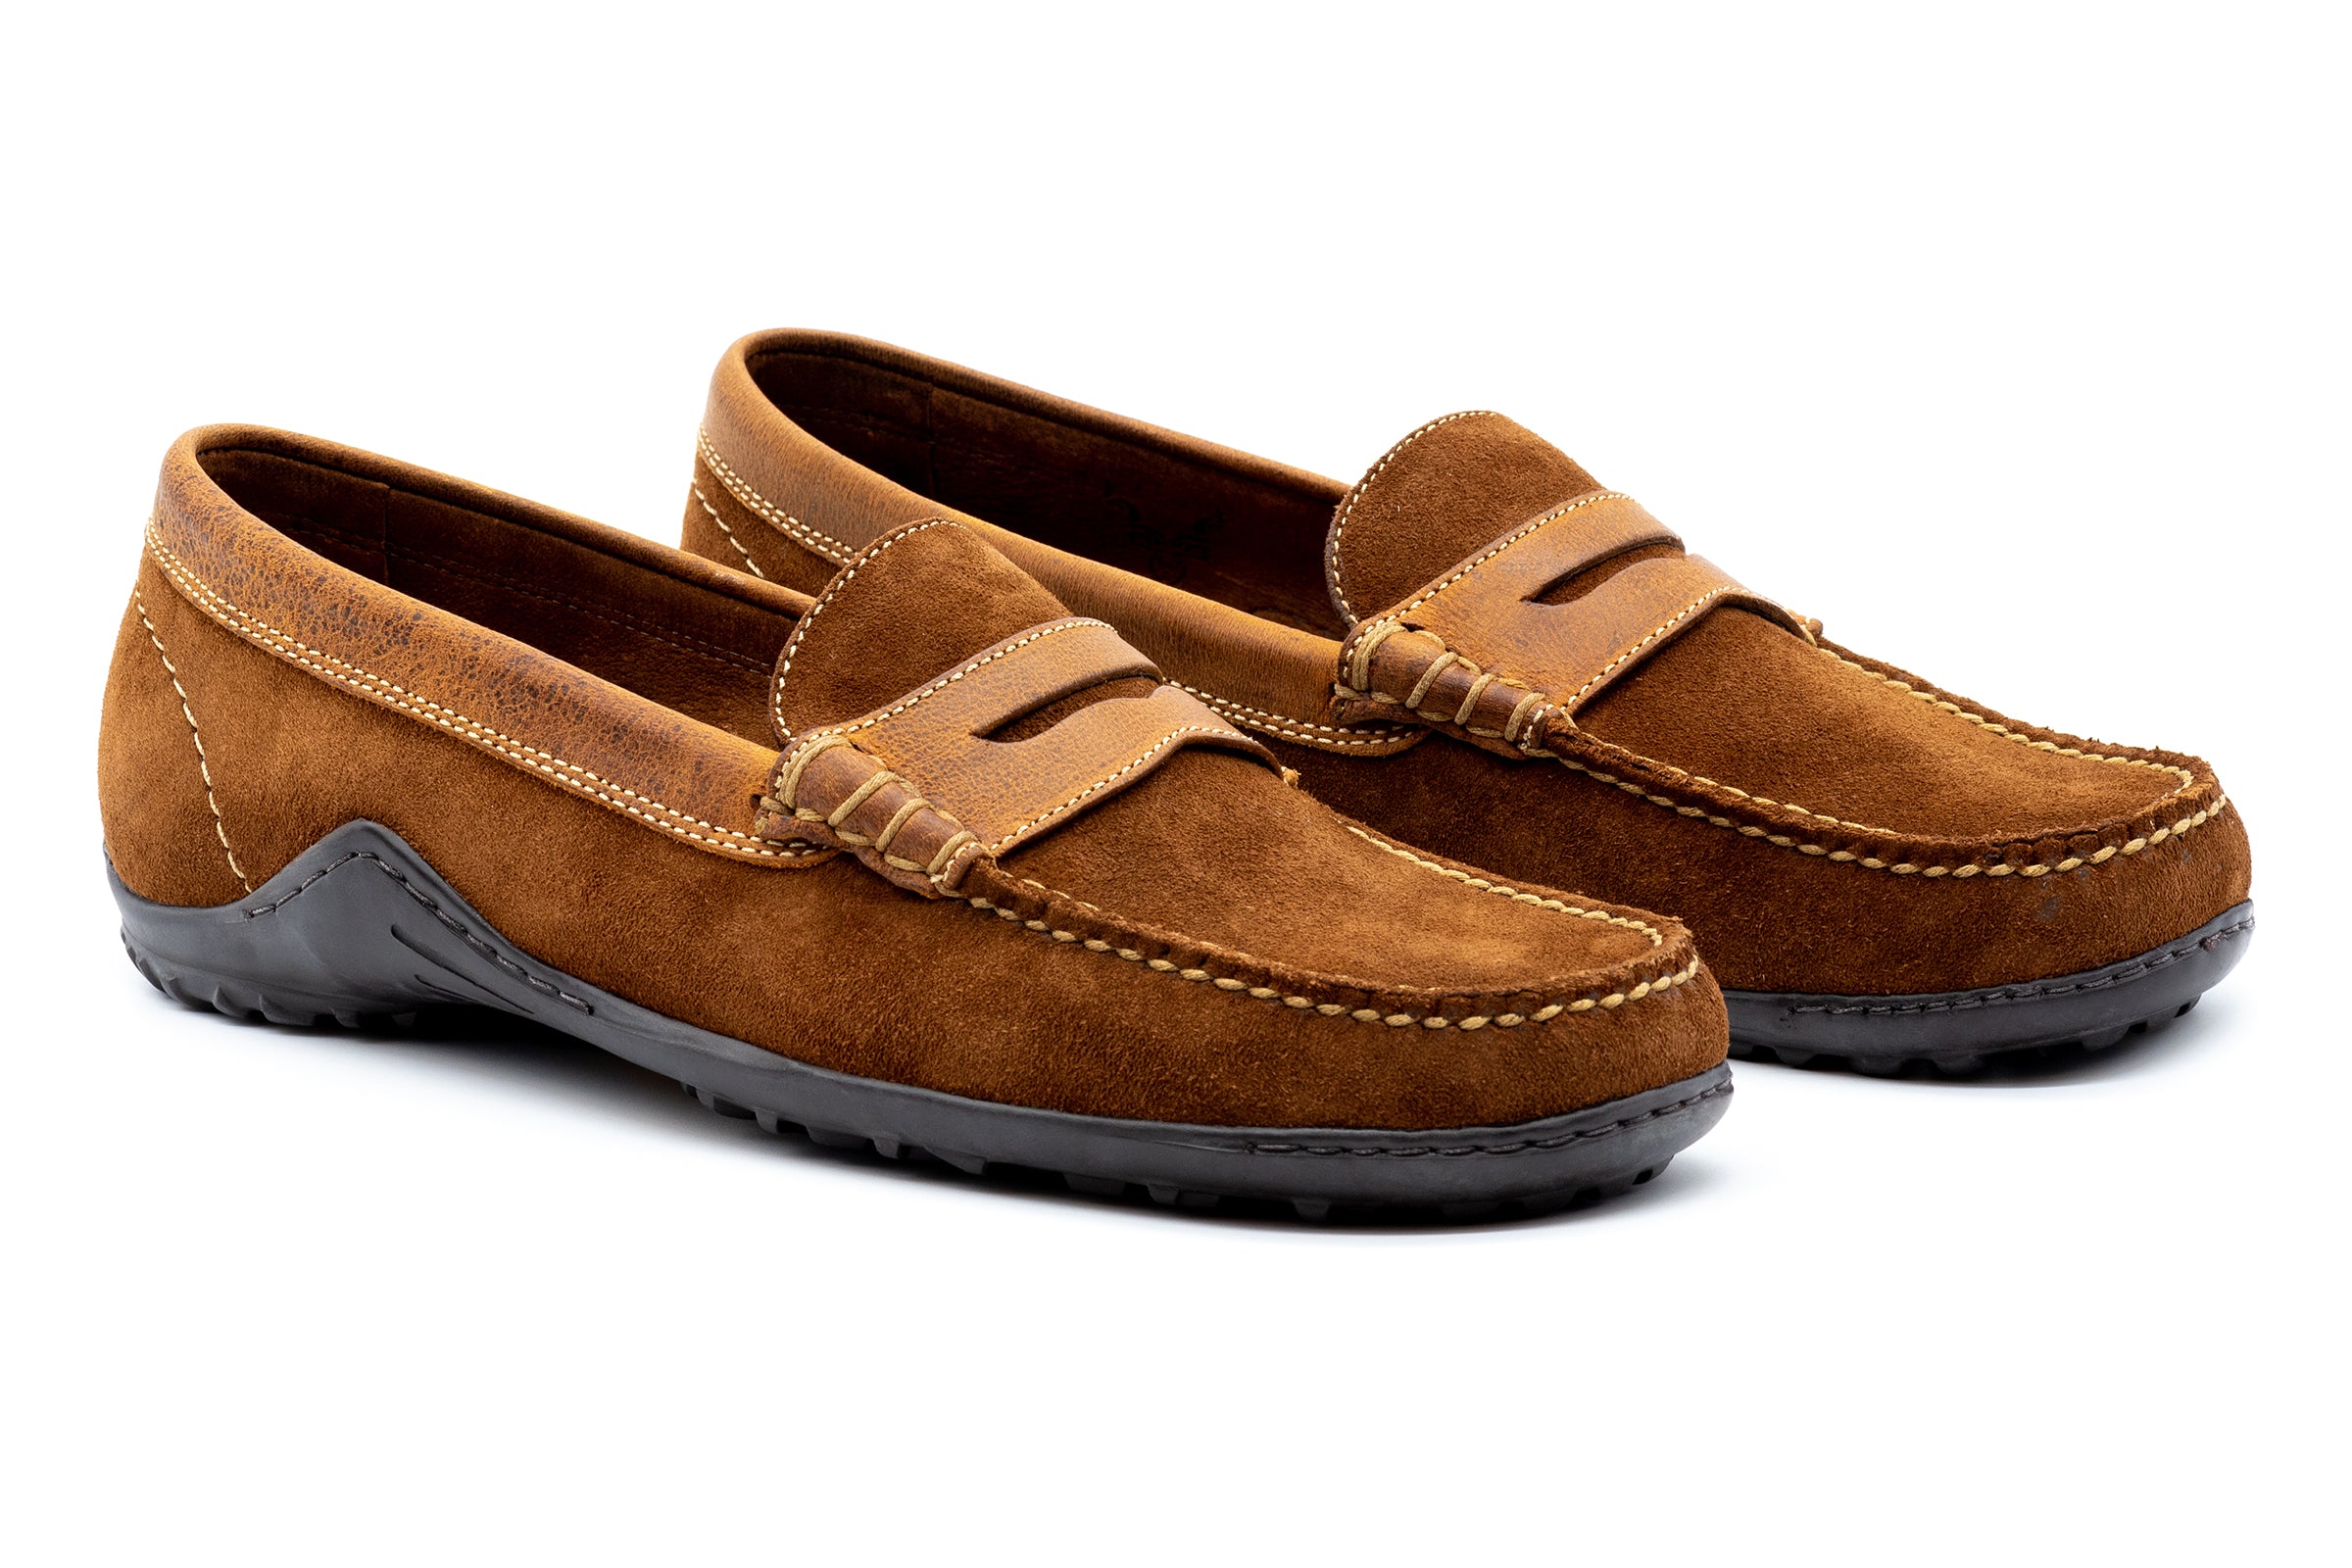 Bill Safari Wild African Kudu Suede Leather Penny Loafers - Tobacco